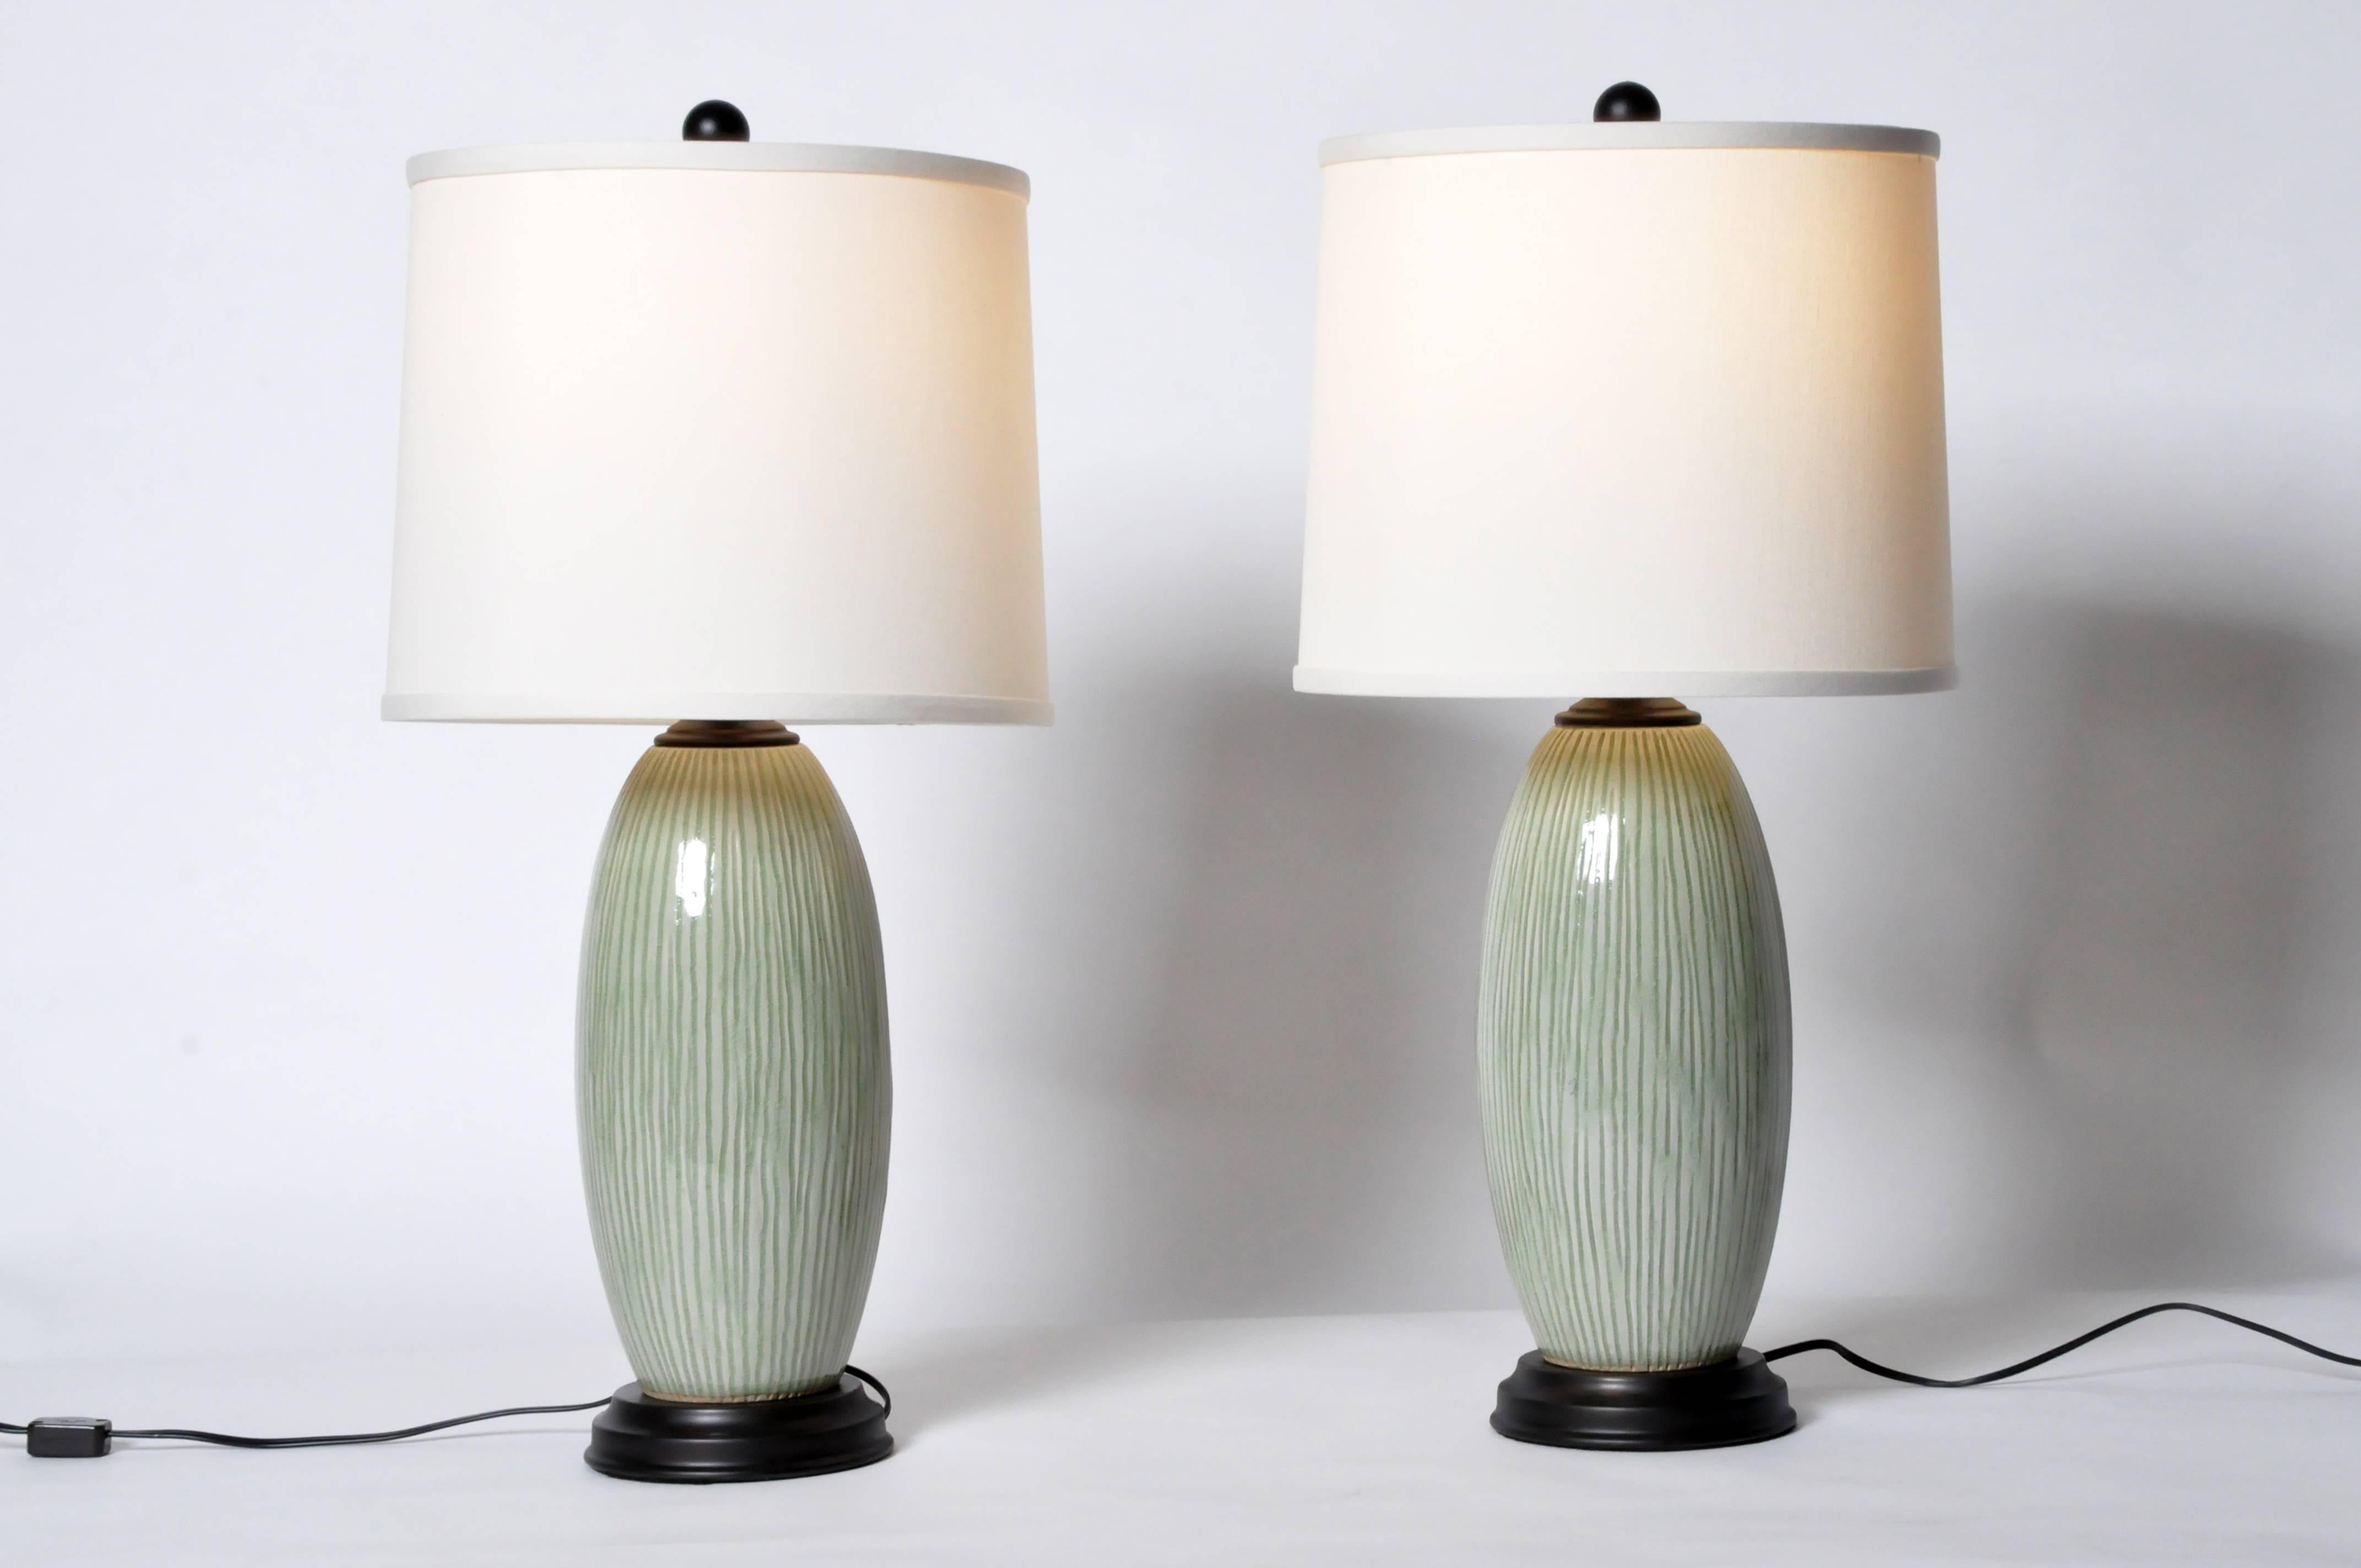 These beautiful green celadon vases are from Thailand and were converted to table lamps.